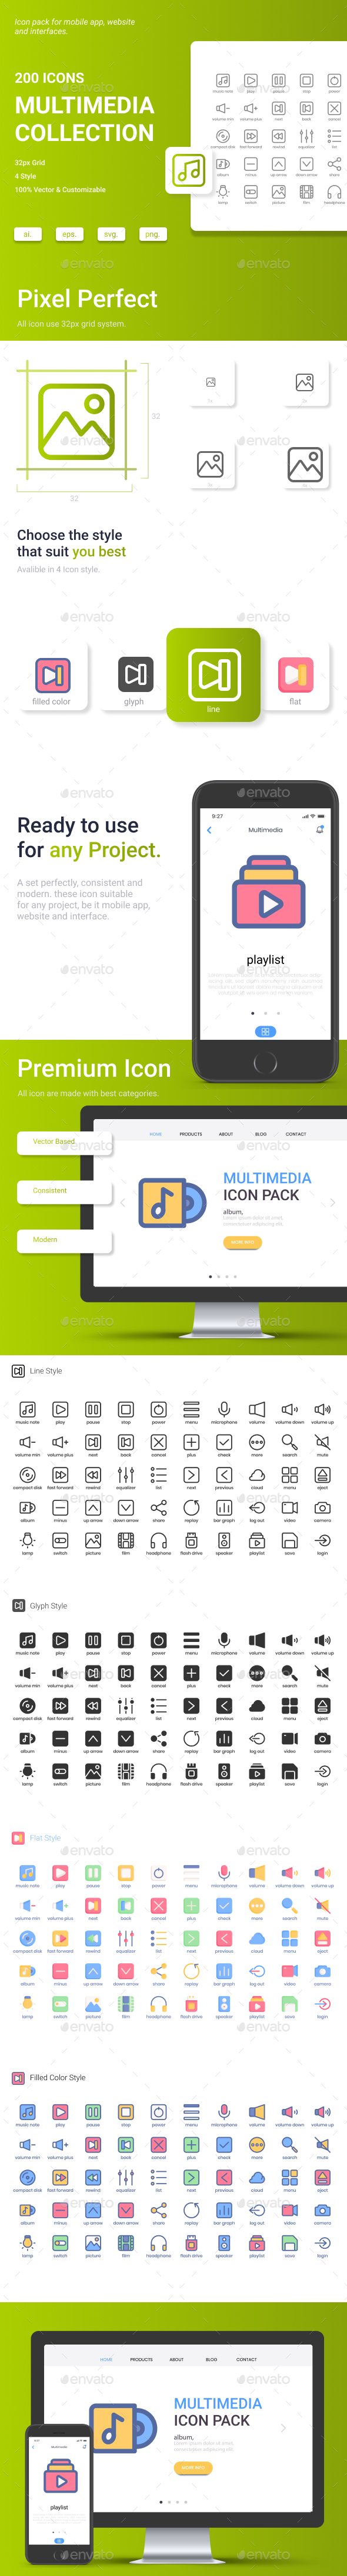 Multimedia Collection icon Set